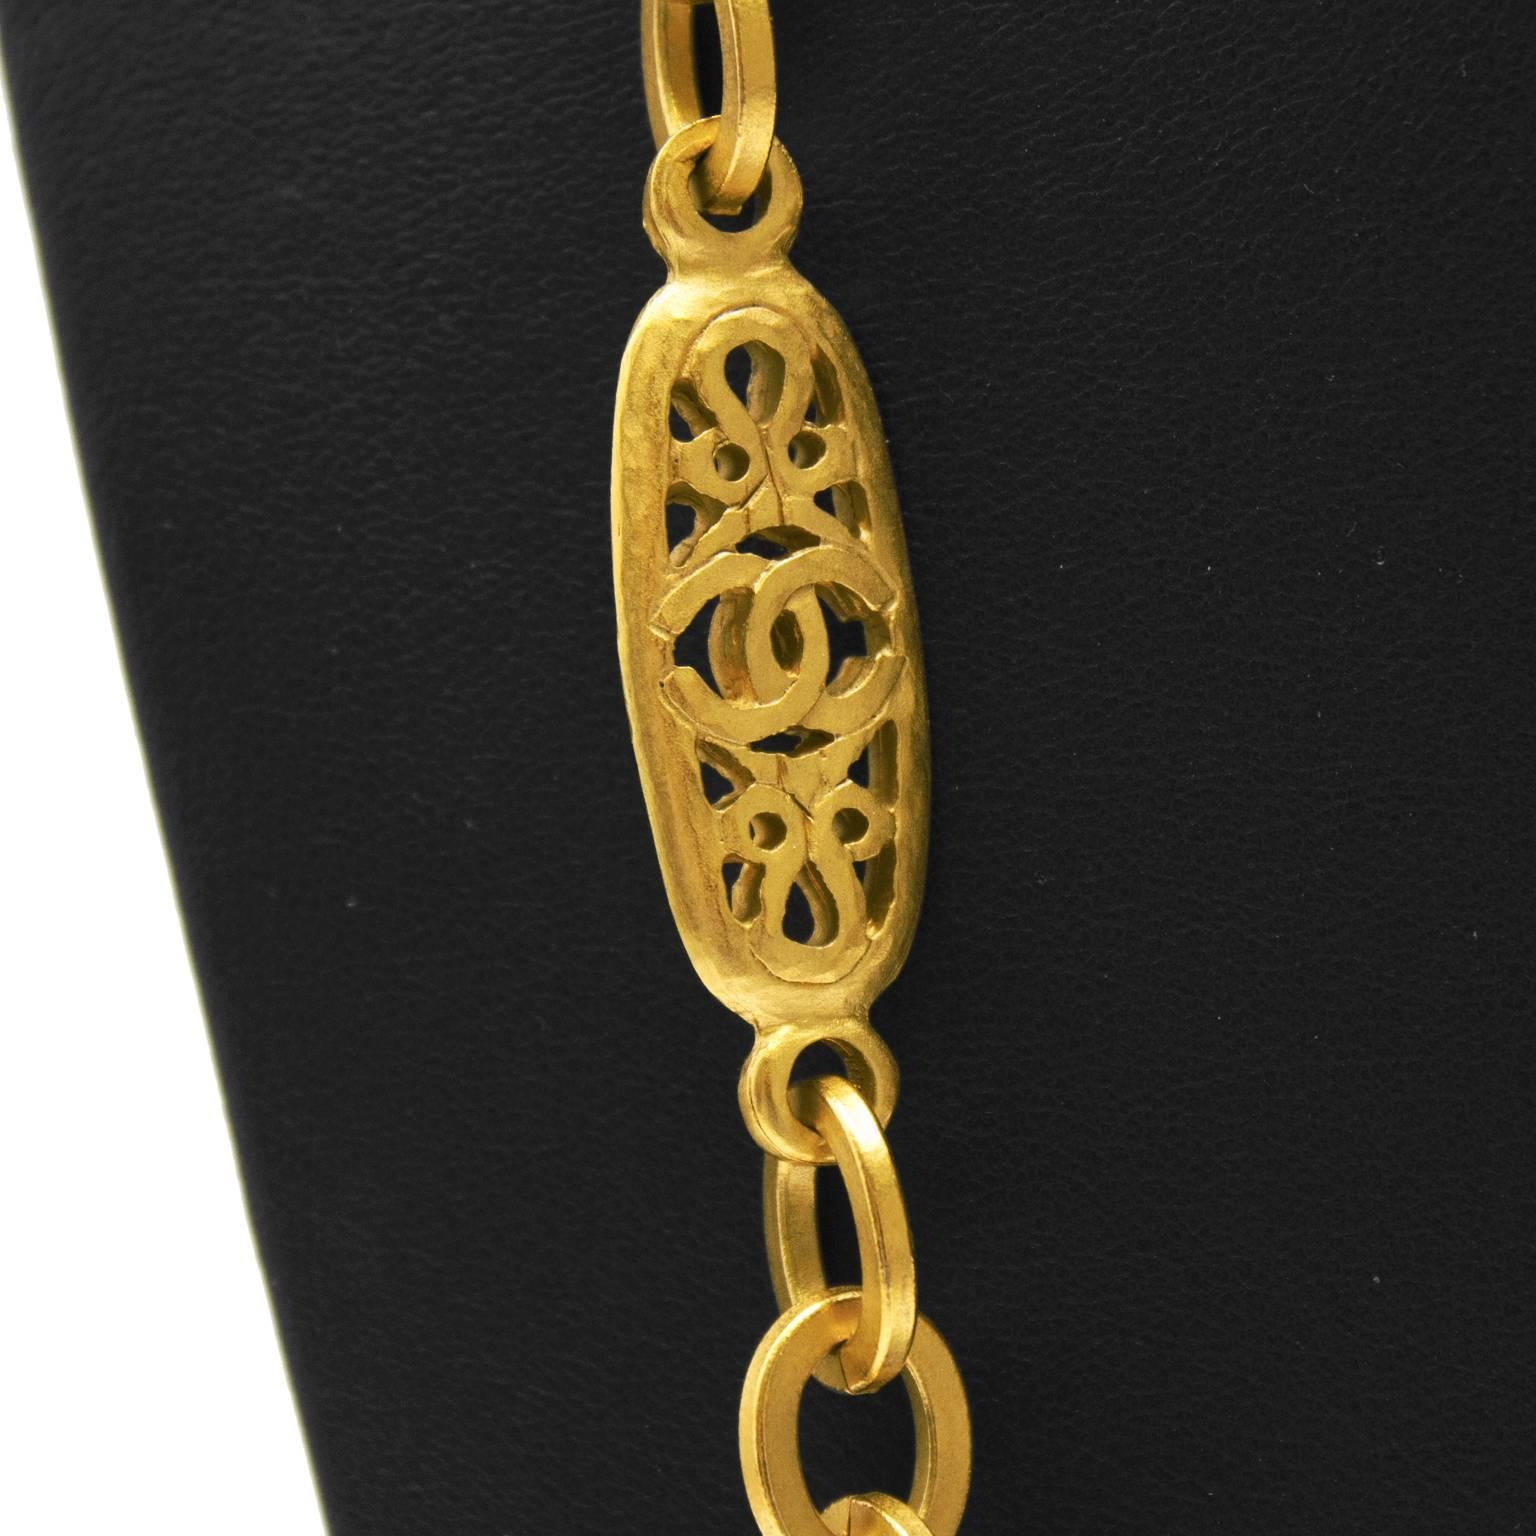 Chanel necklace with CC oval links from the 1995 Spring collection. The necklace is made of medium size flat link cable chain and oval shaped CC link with a swirl detail. Fastens with a spring ring closure, in excellent condition.